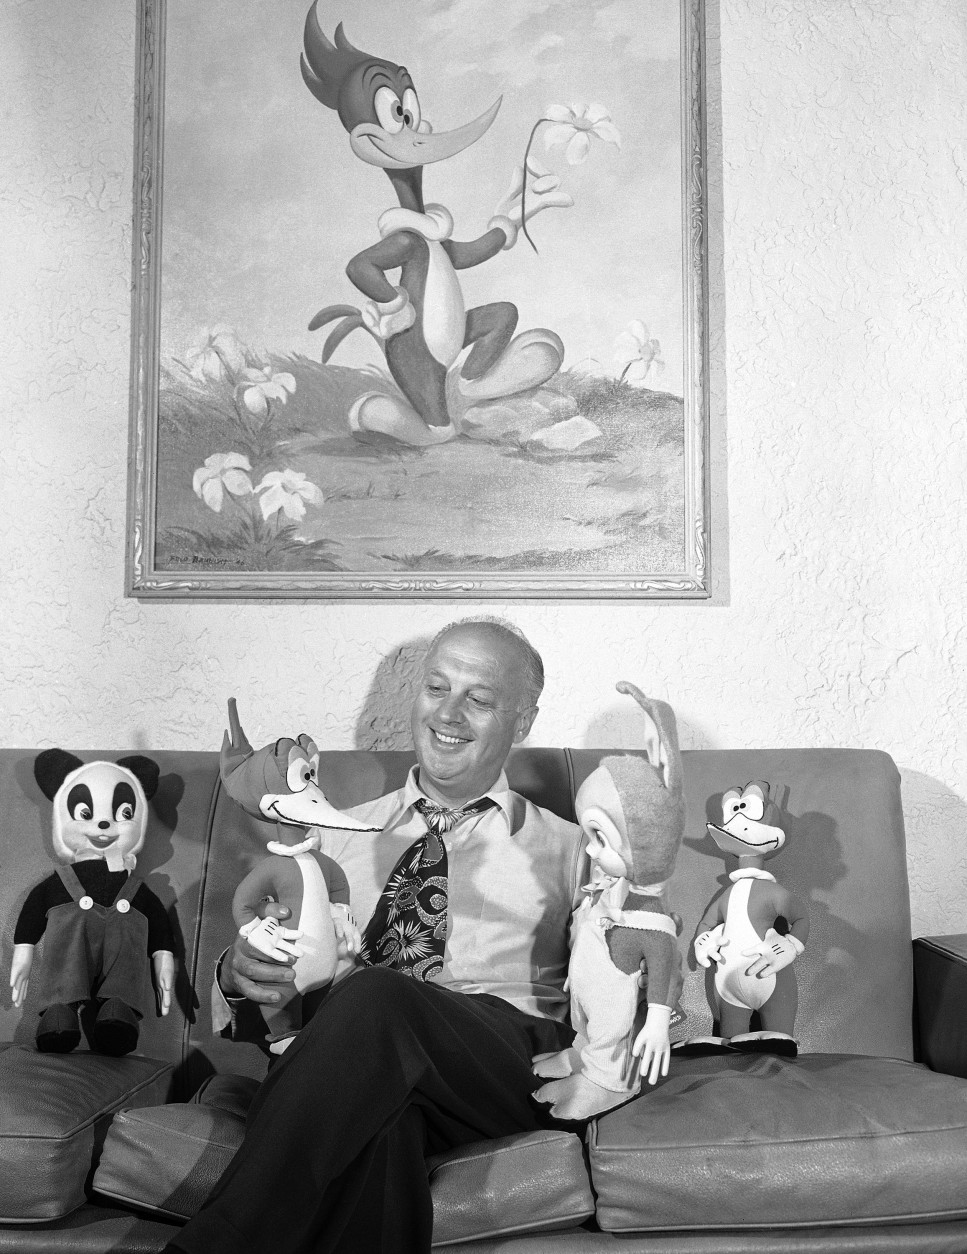 Animated cartoon motion picture producer Walter Lantz sits with dolls inspired by some of his cartoon stars in his office in Hollywood, Los Angeles on August 20, 1948. He holds Woody Woodpecker and Oswald Rabbit. Alongside of him are Andy Panda and another Woody Woodpecker. The last named is also shown in the painting hanging on the wall. Lantz, a graduate of the Art Students League in New York City, began in the animated cartoon field in 1916. (AP Photo/Don Brinn)